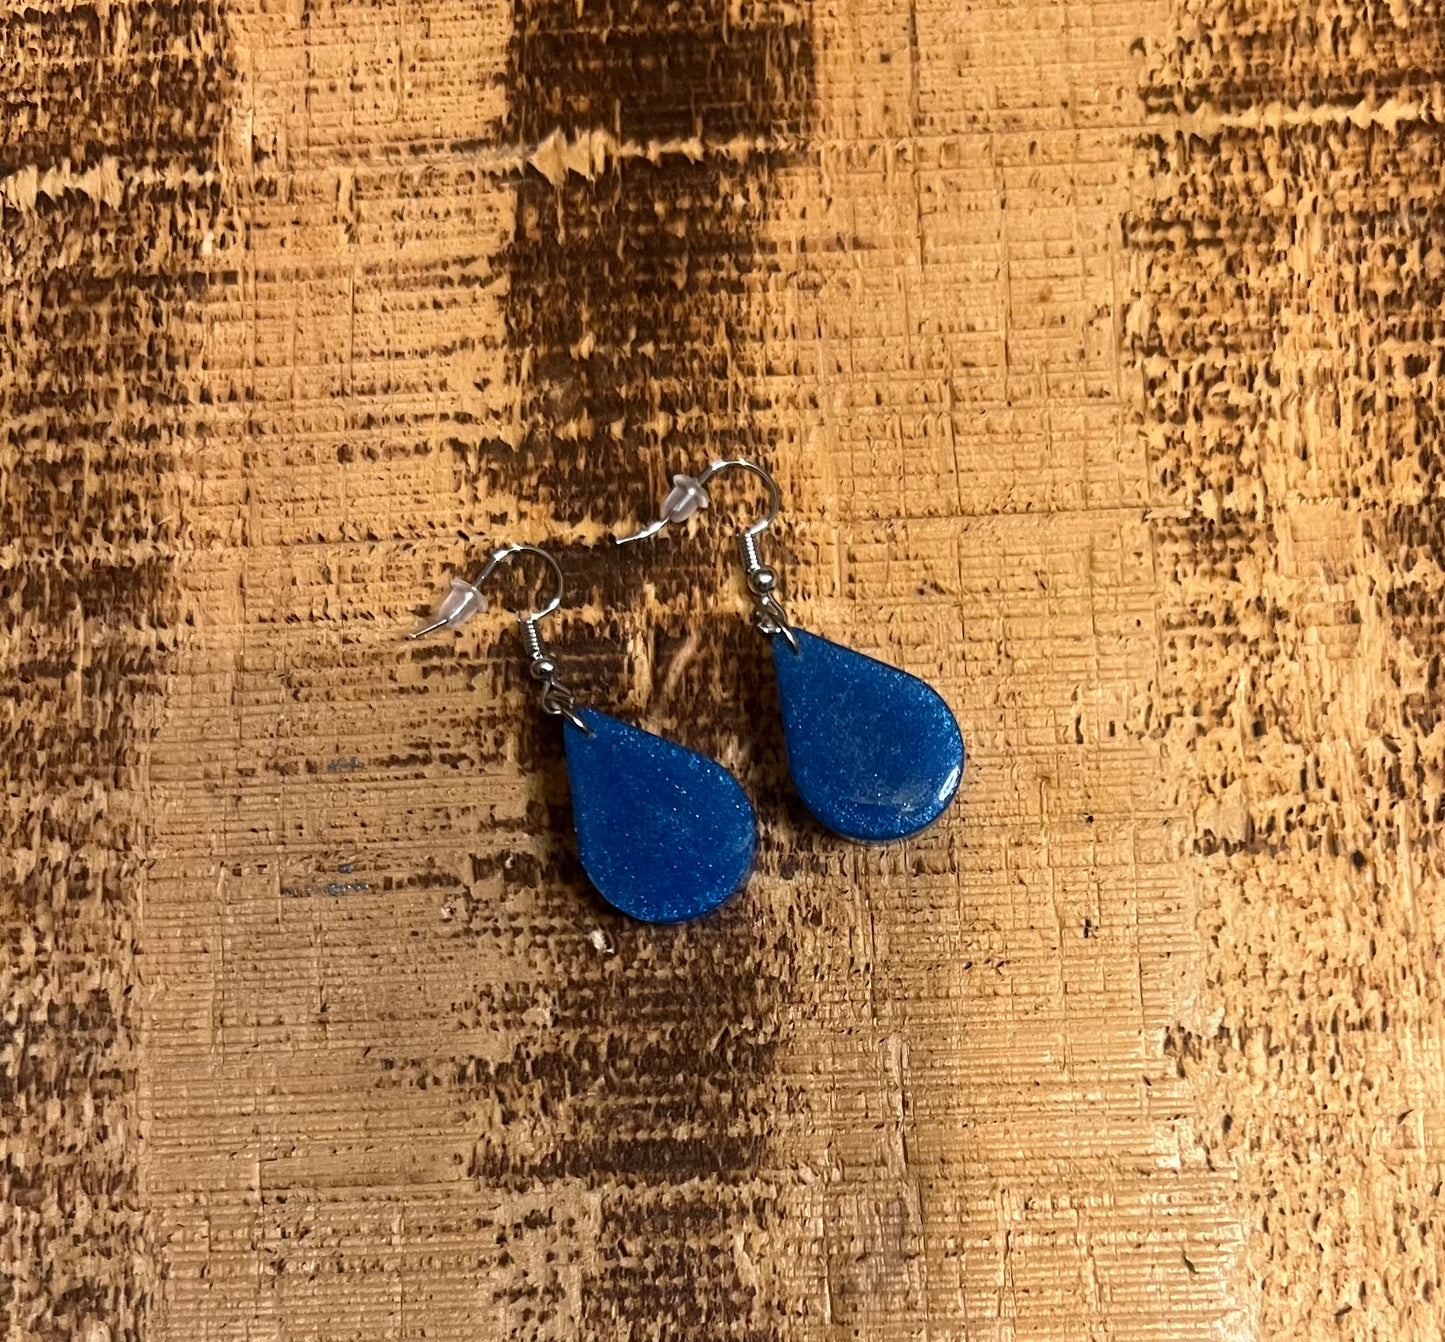 Hand Crafted Epoxy Resin Earrings